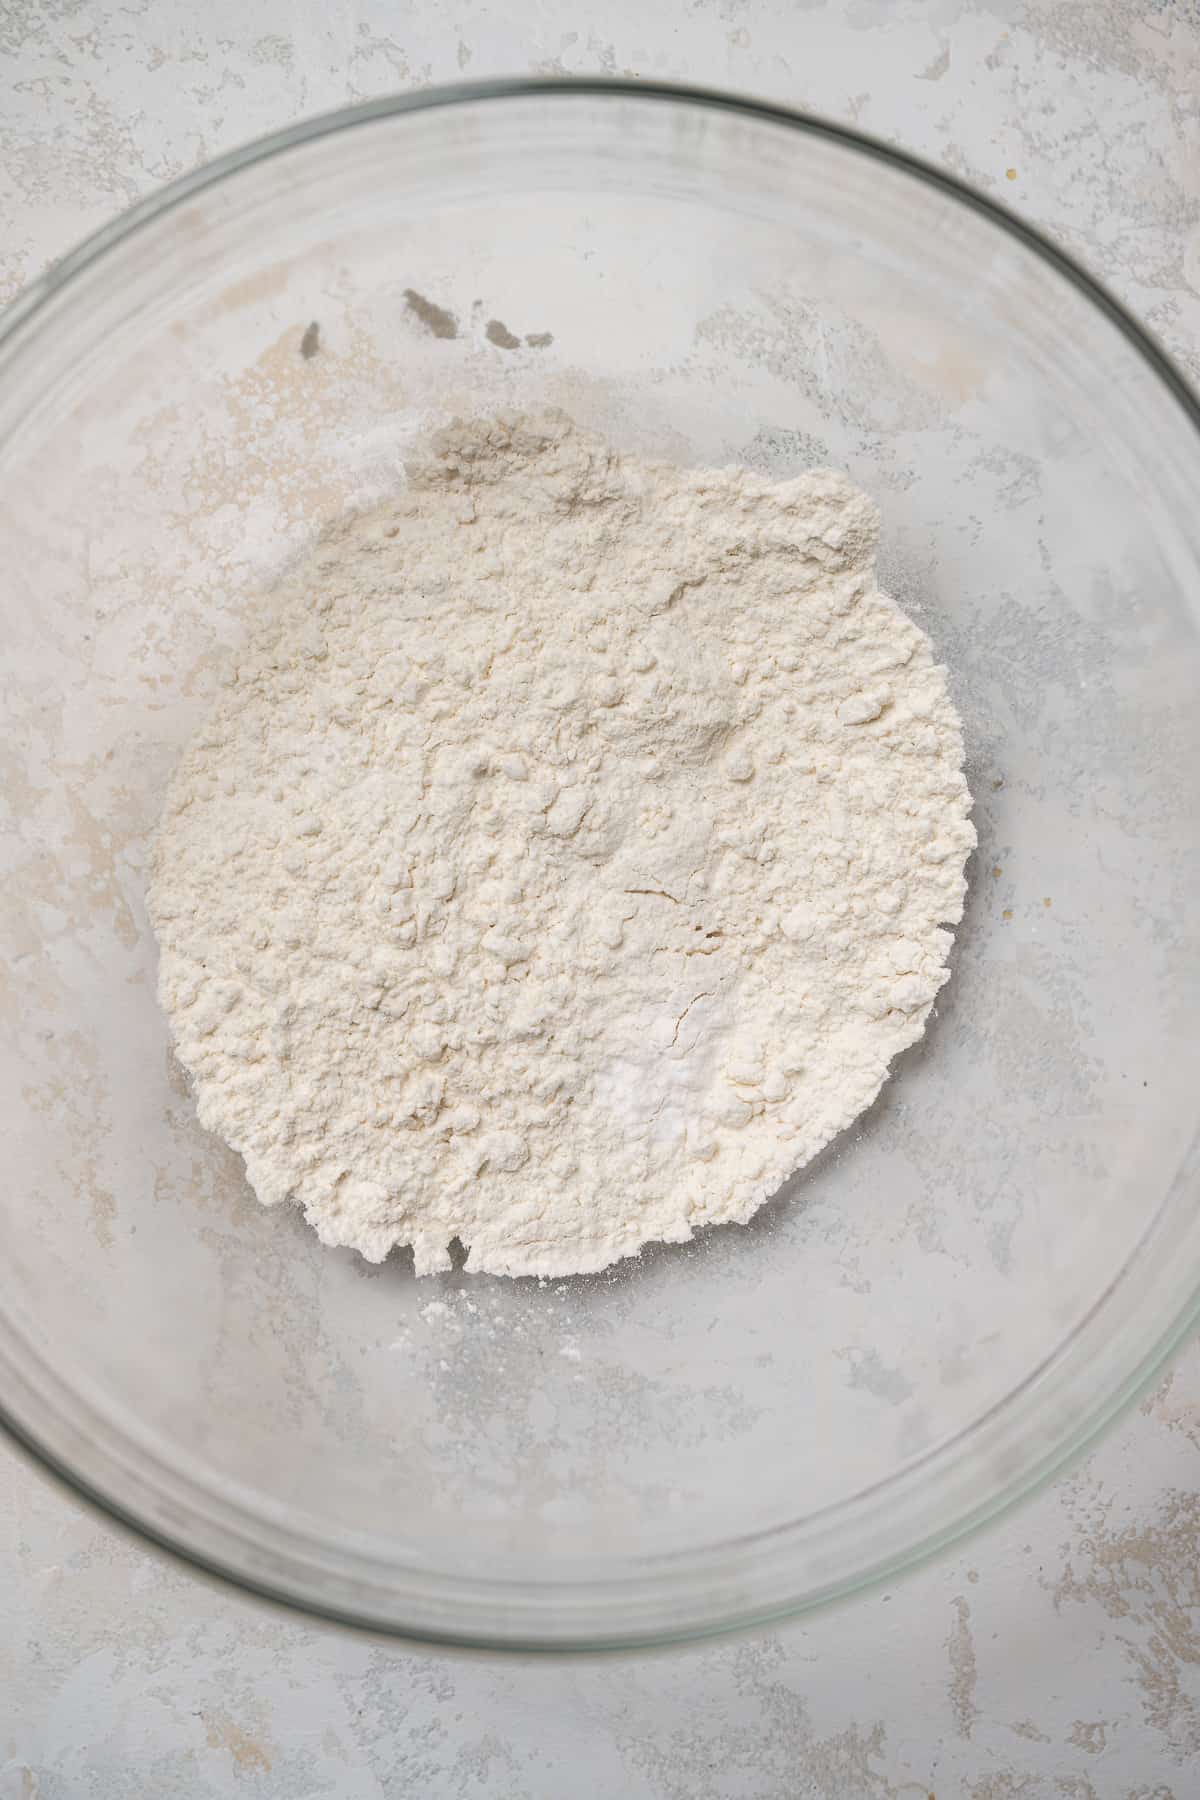 flour, baking soda, and salt in a glass mixing bowl.